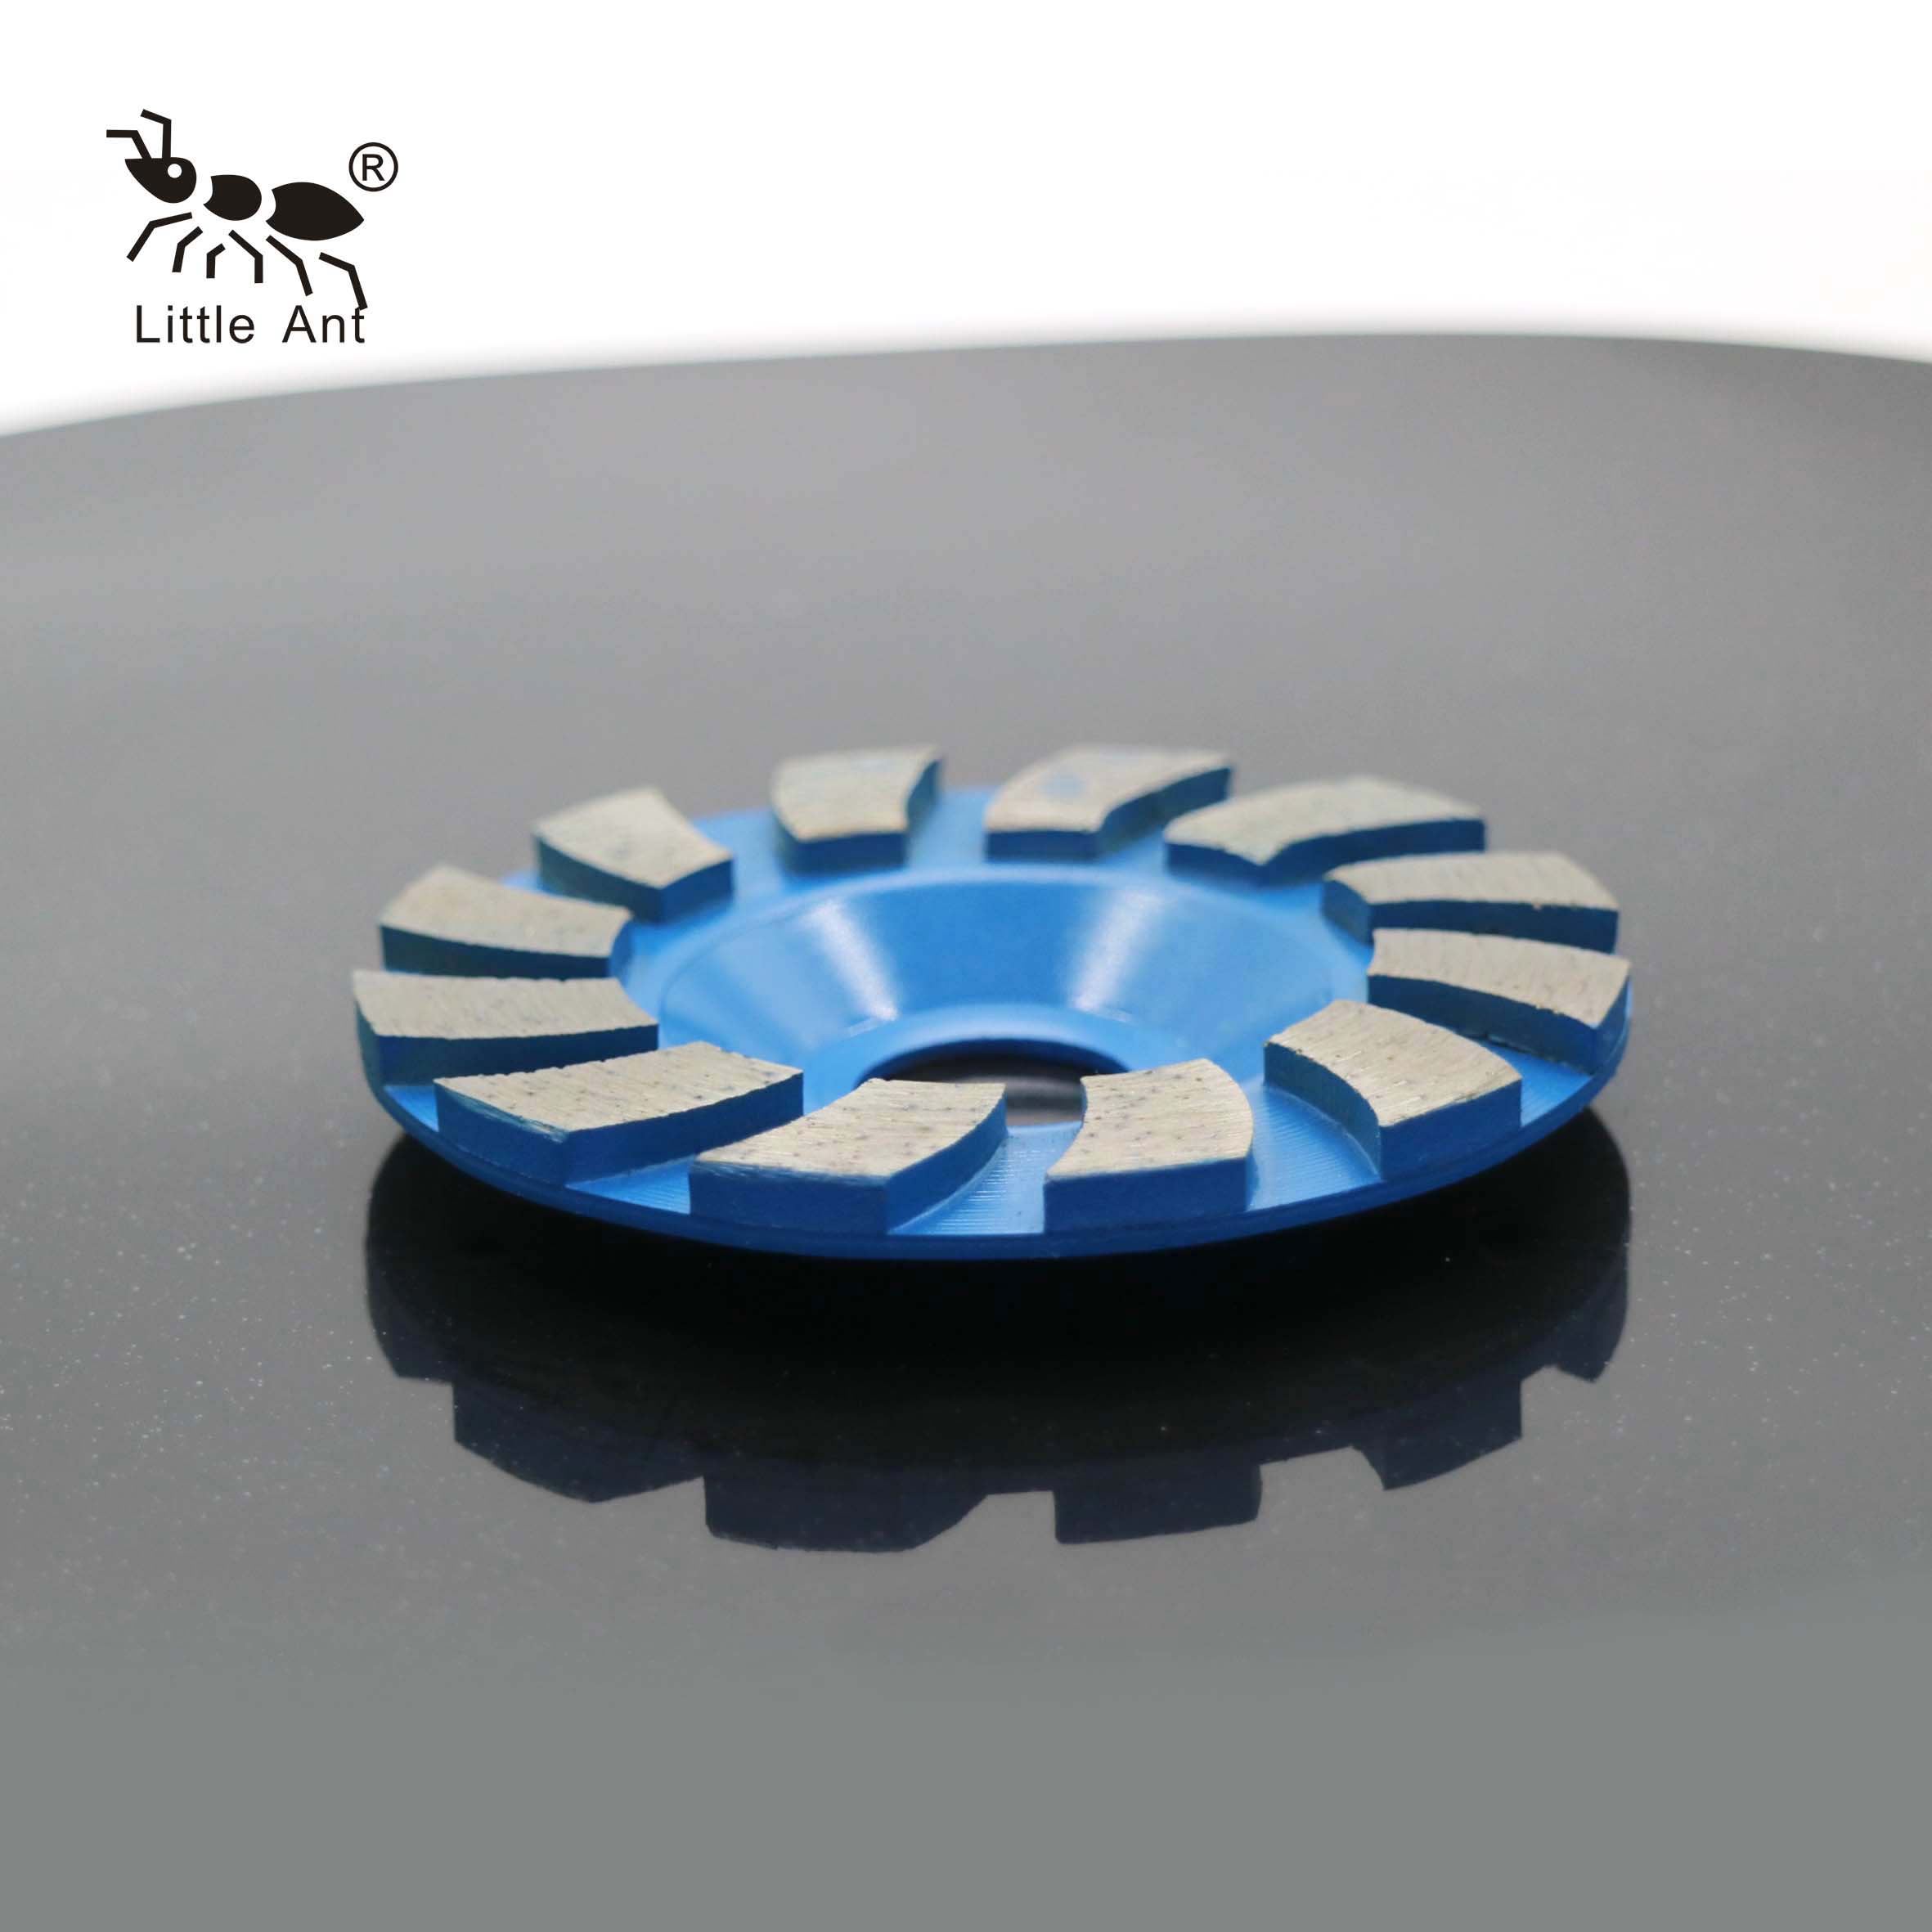 Best Seller Metal Bond Painted Diamond Concrete Grinding Wheel for Grinding Concrete And Stone.